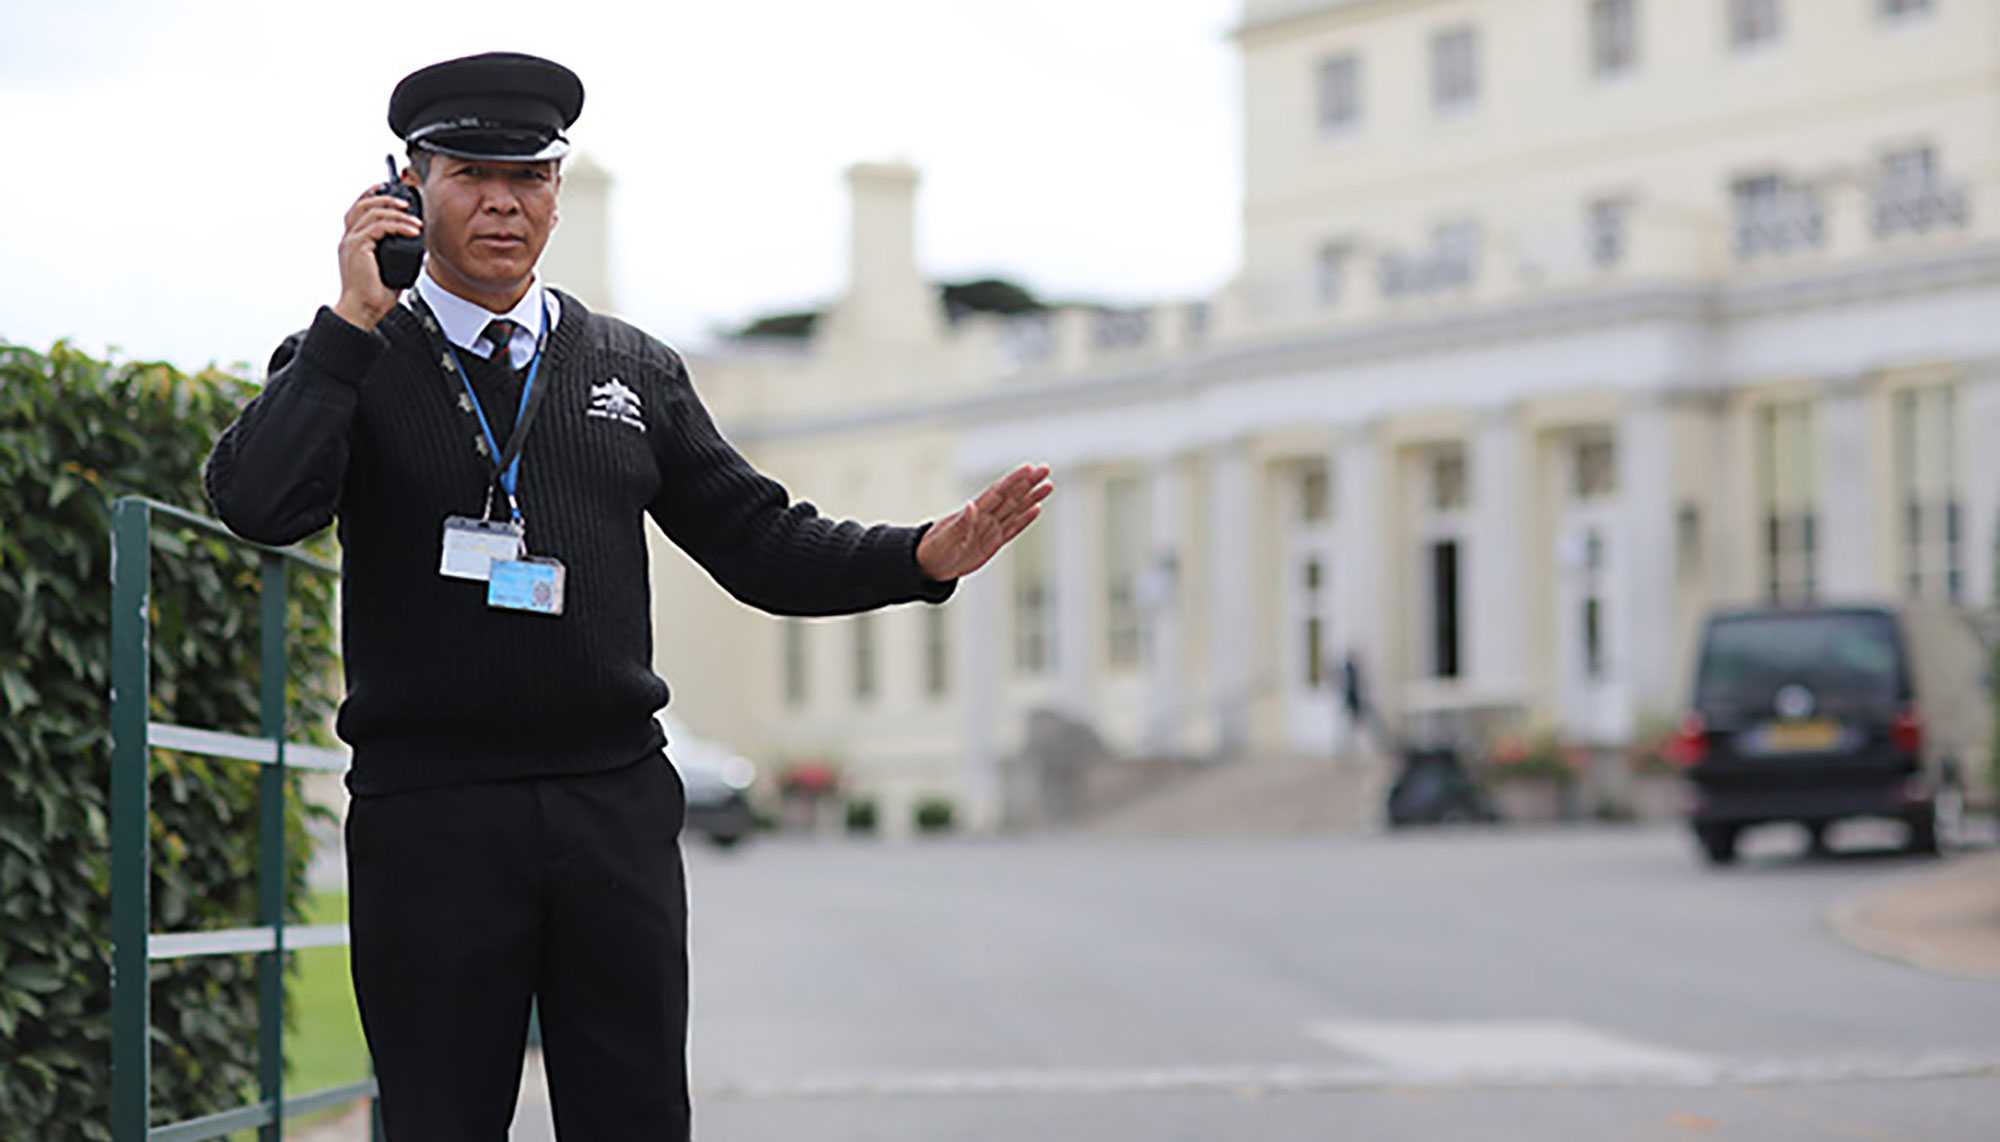 Security service using Kenwood digital two way radio systems